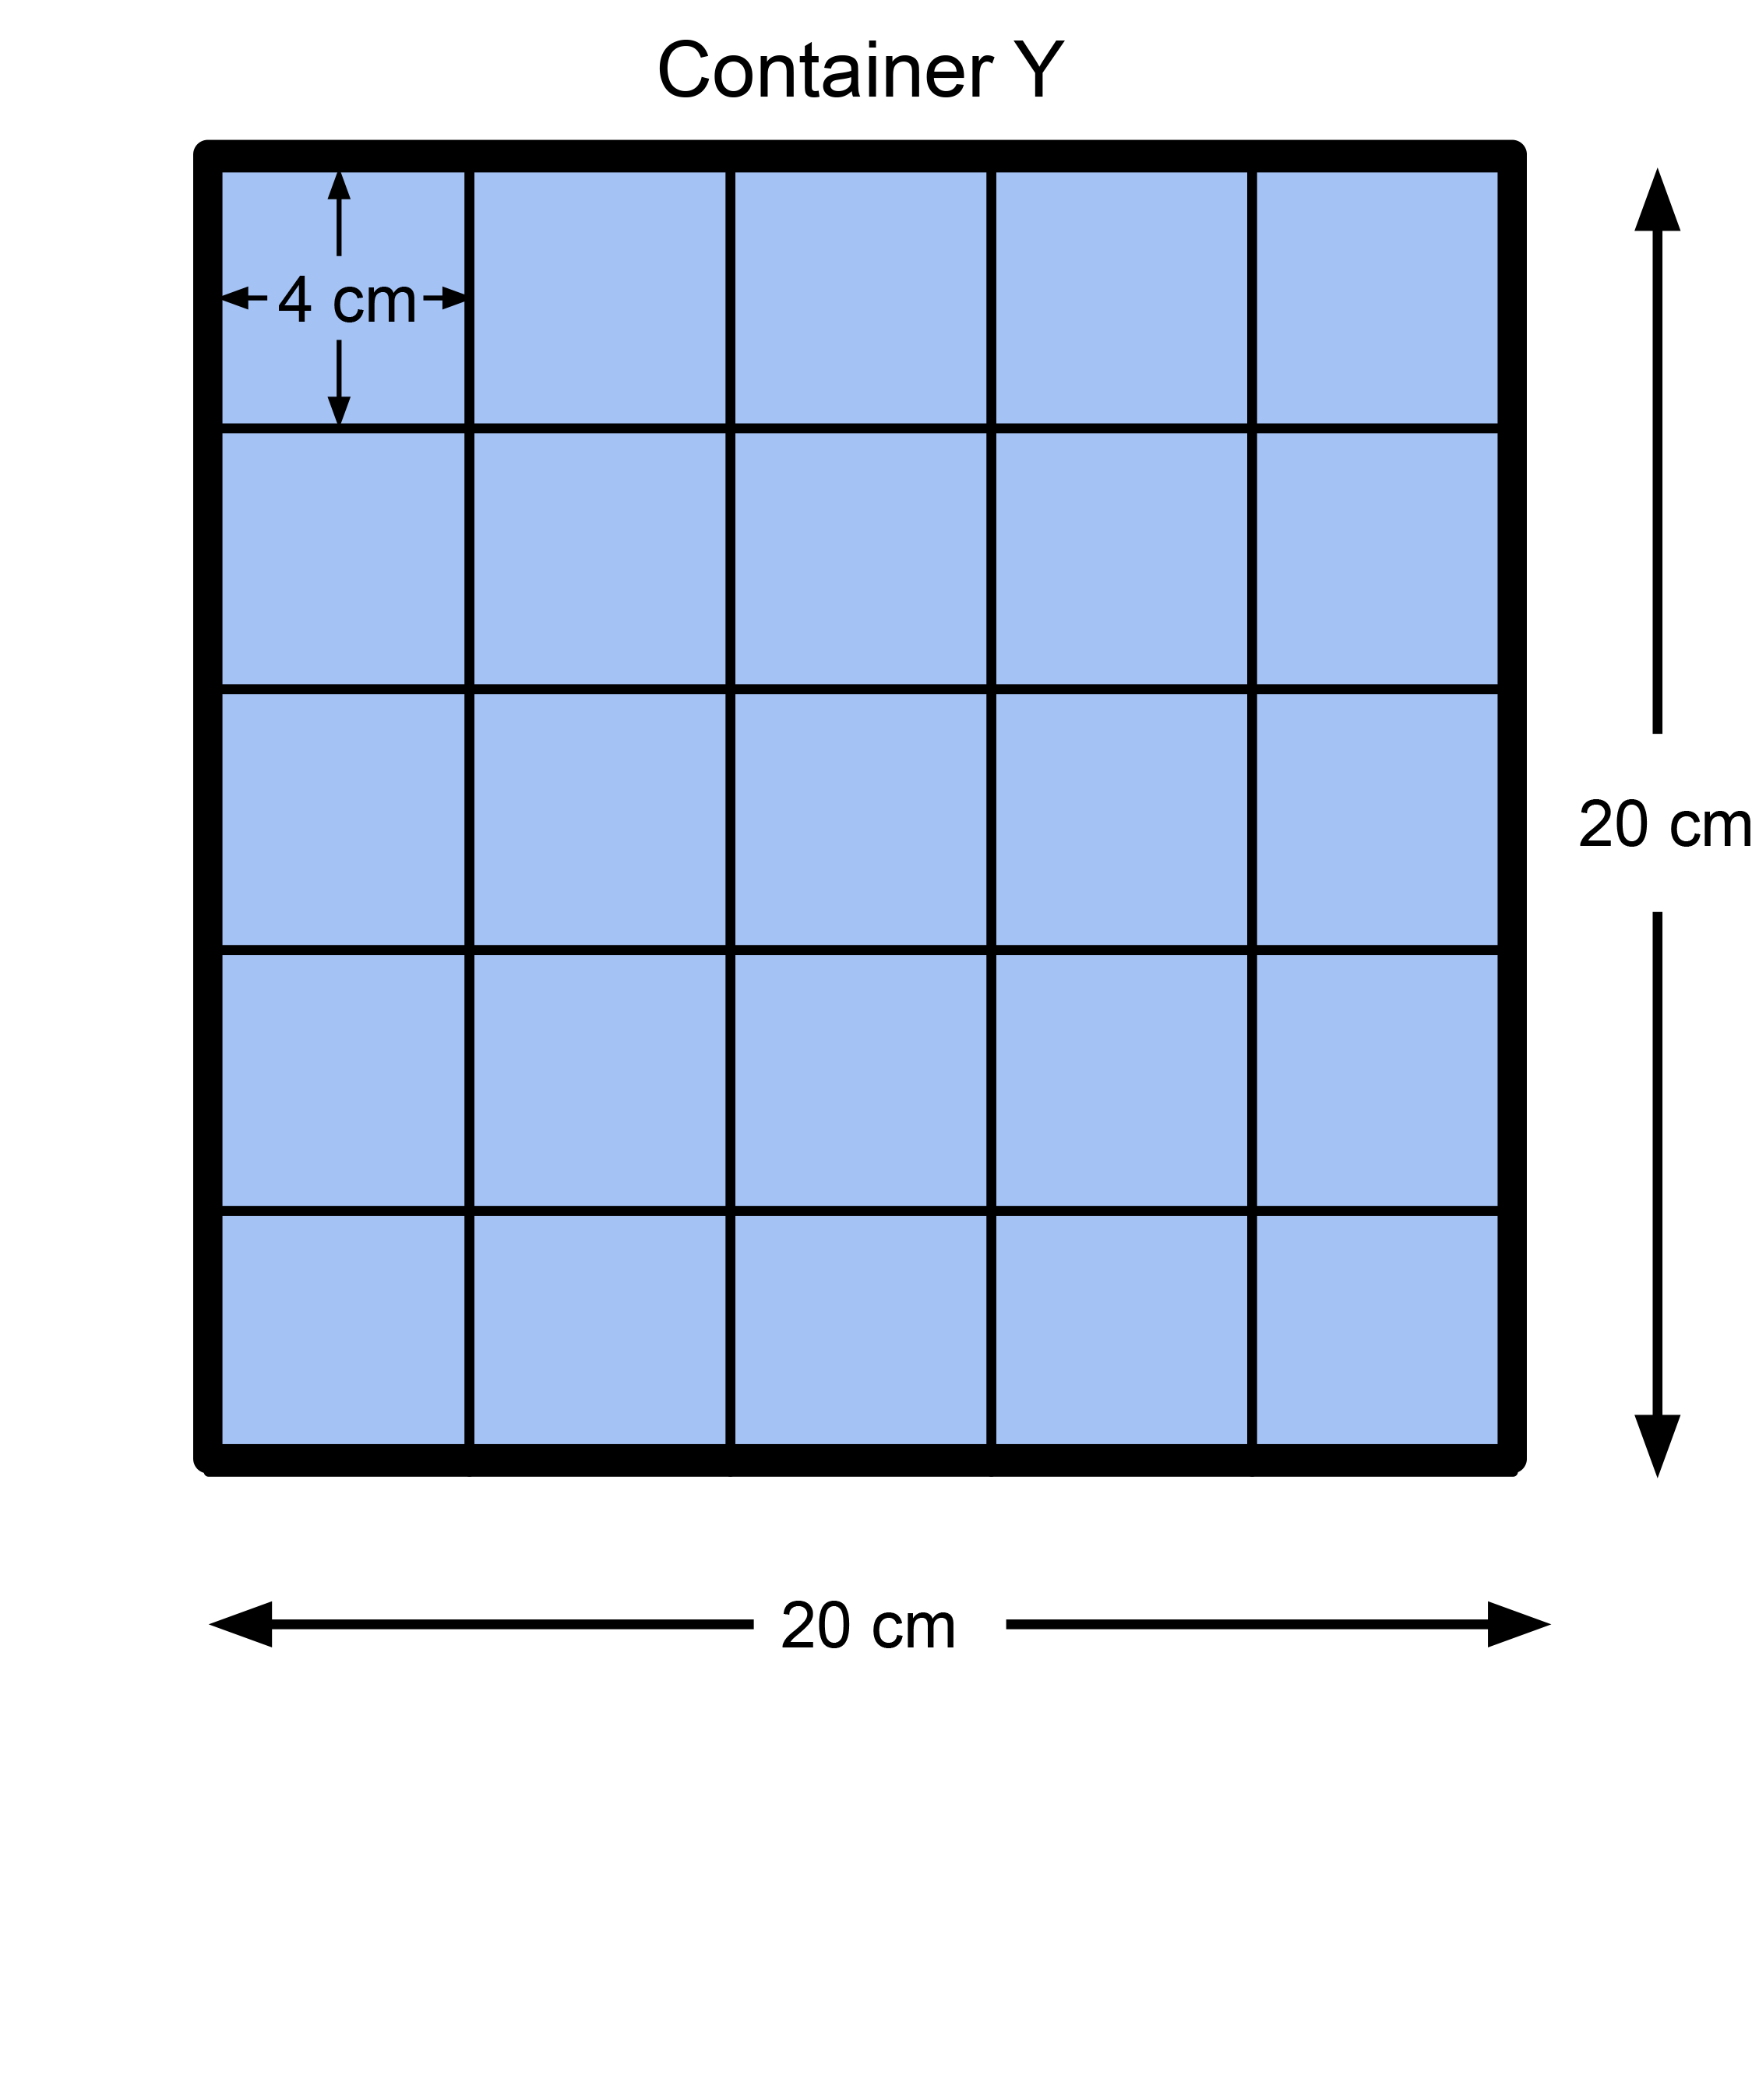 The rectangular base of Container Y with length 20 centimetres and width 20 centimetres. A five by five grid of squares of side length 4 centimetres exactly covers the base.